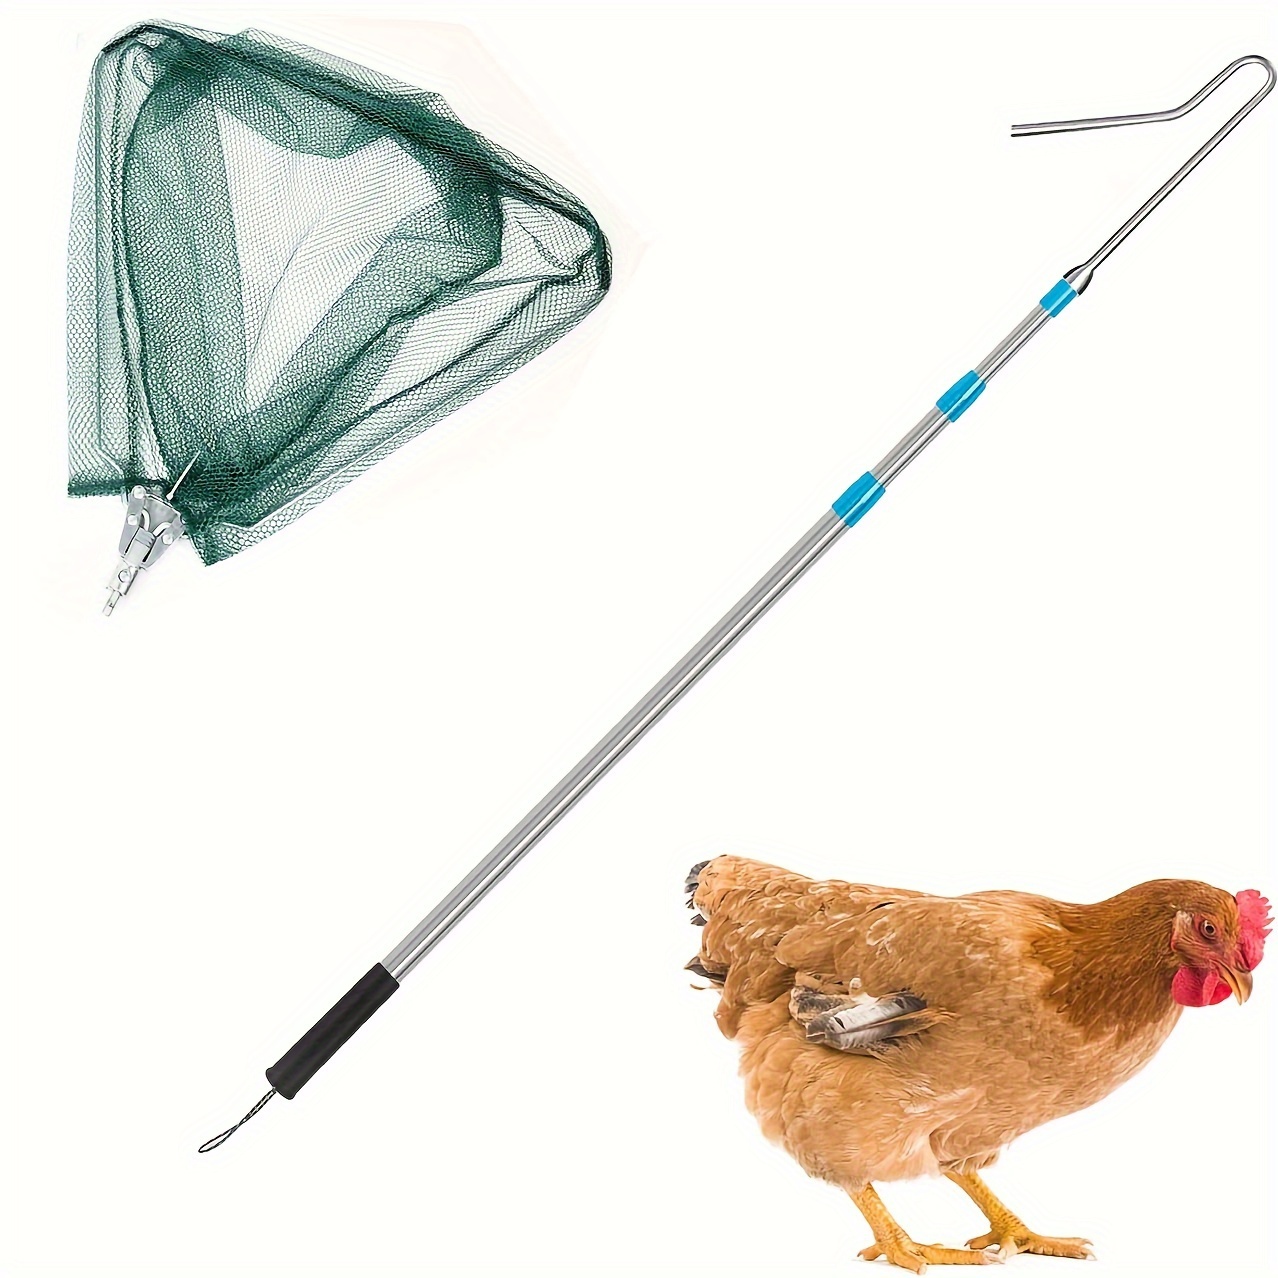 Animal Catch Pole Control Tool Net, Poultry Catching Pole Kit, Cat